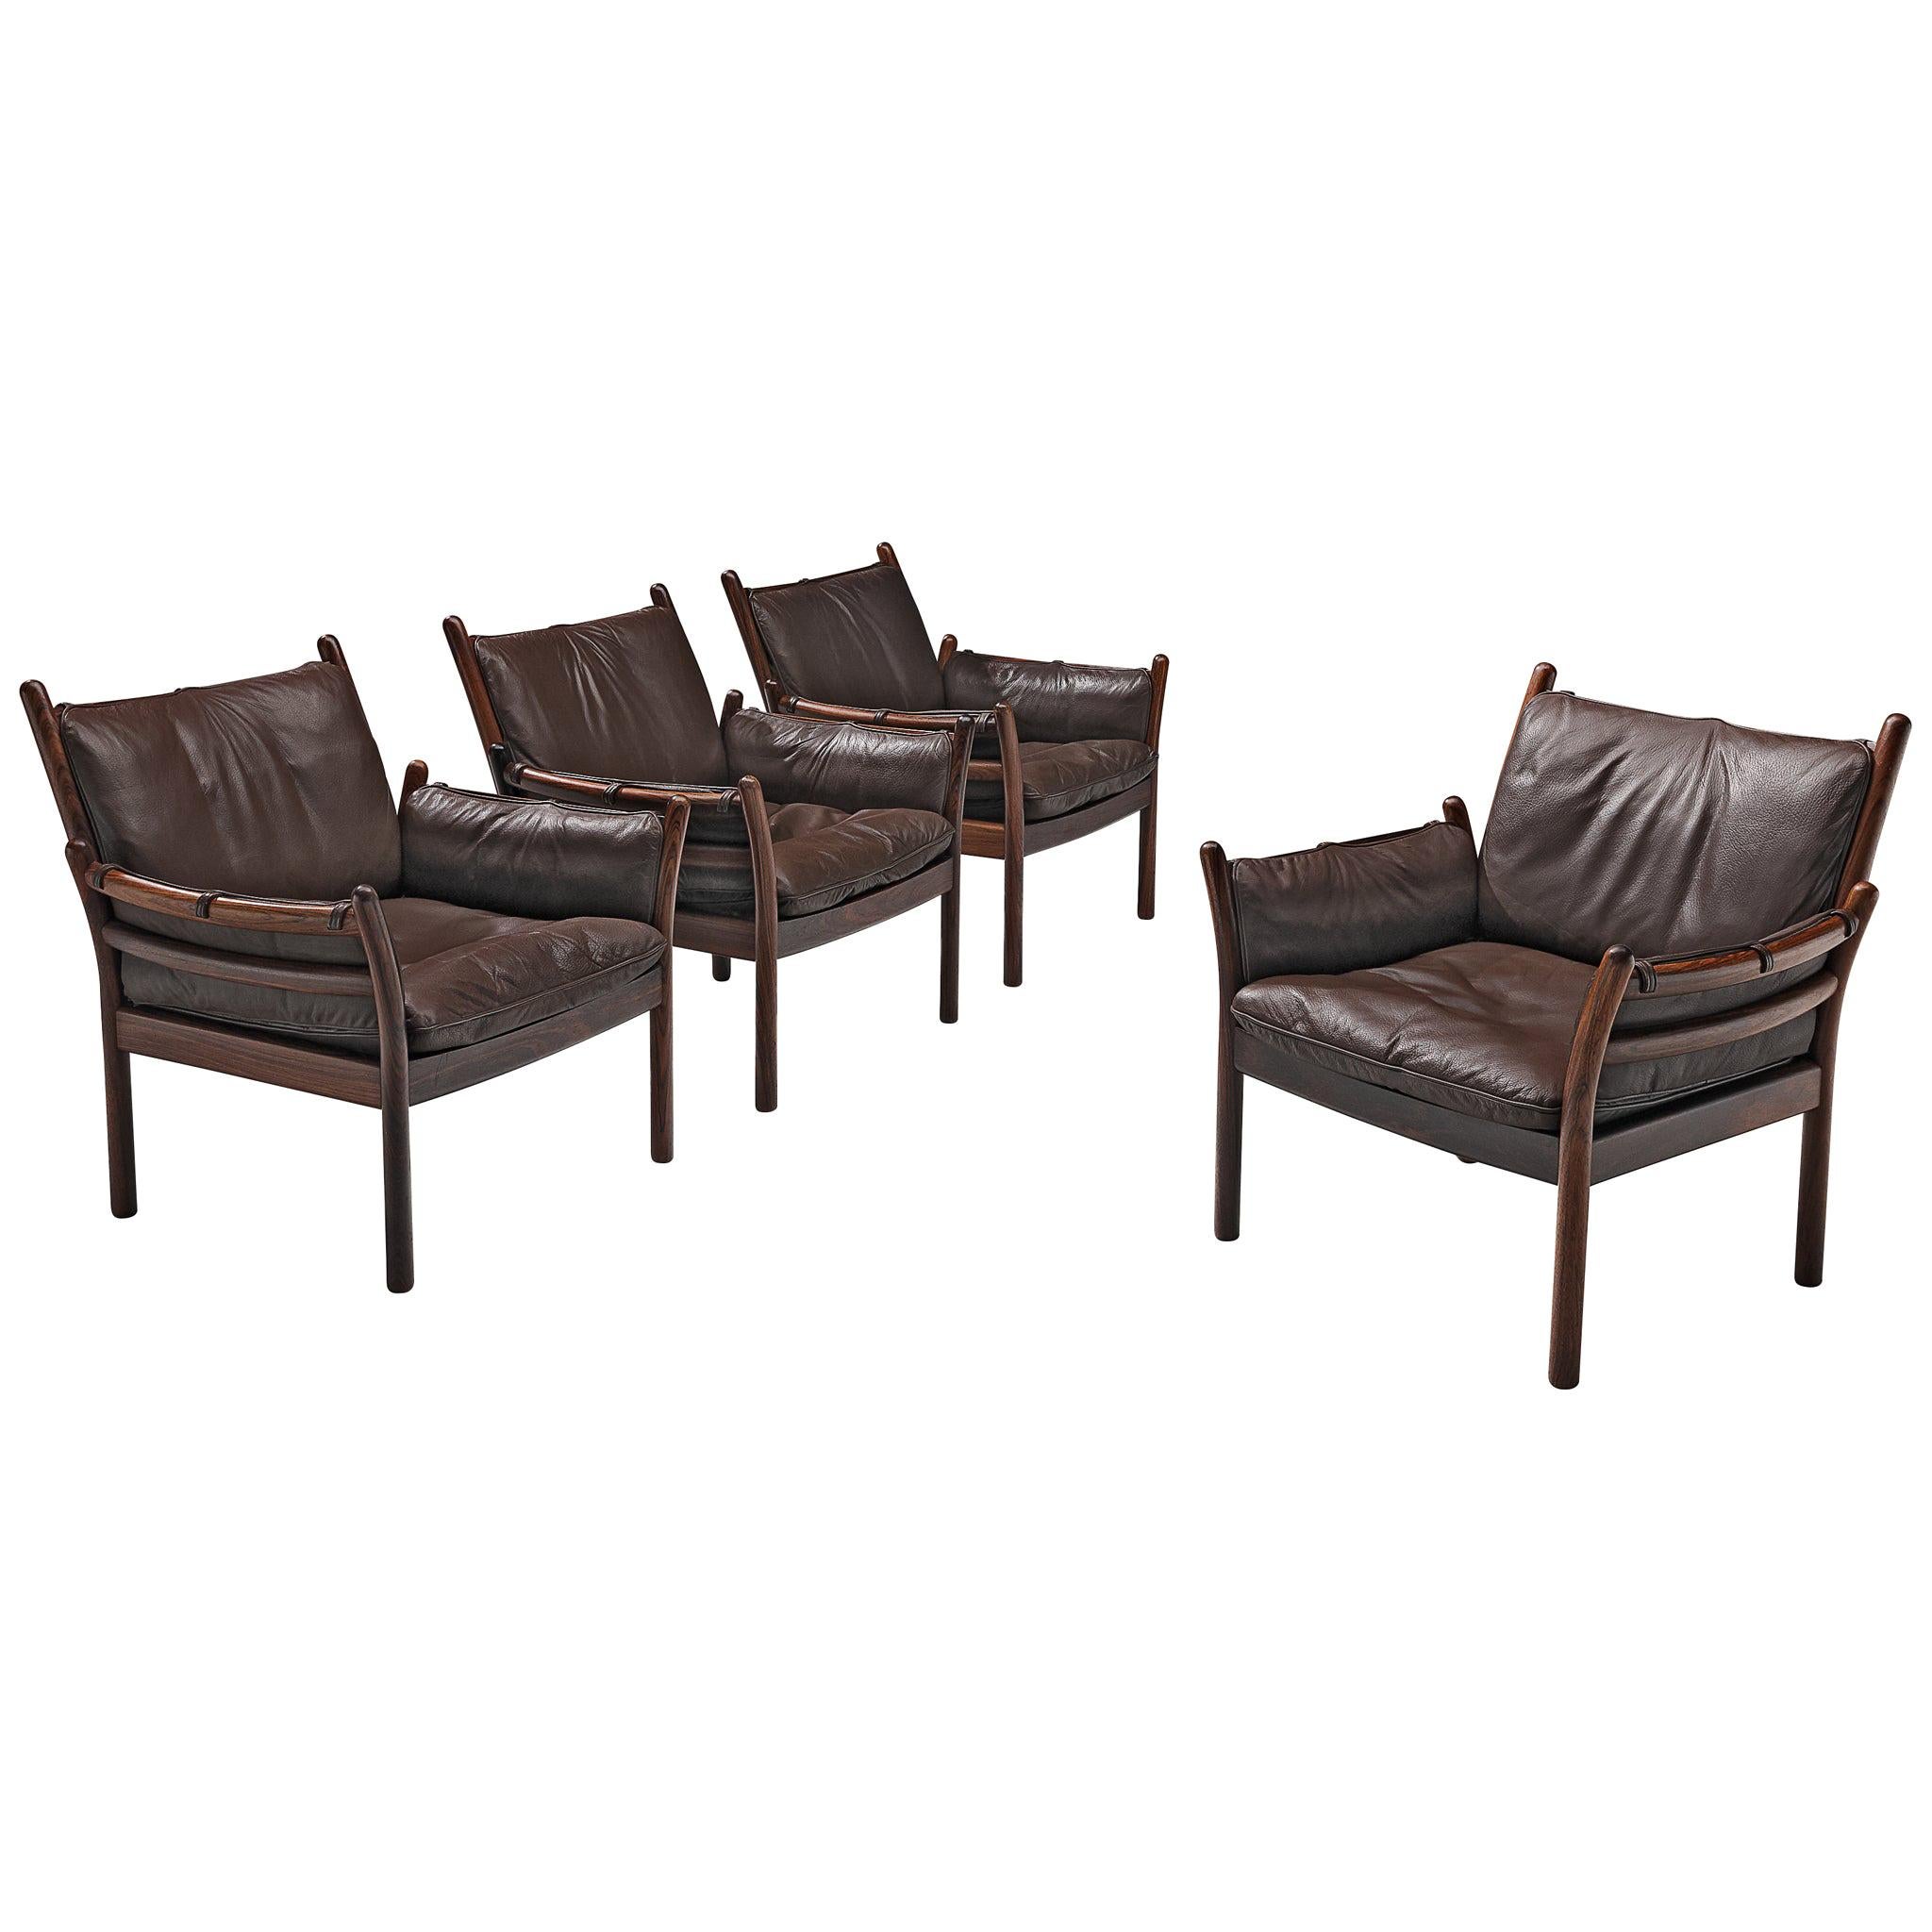 Four 'Genius' Chairs in Rosewood and Brown Leather by Illum Wikkelsø